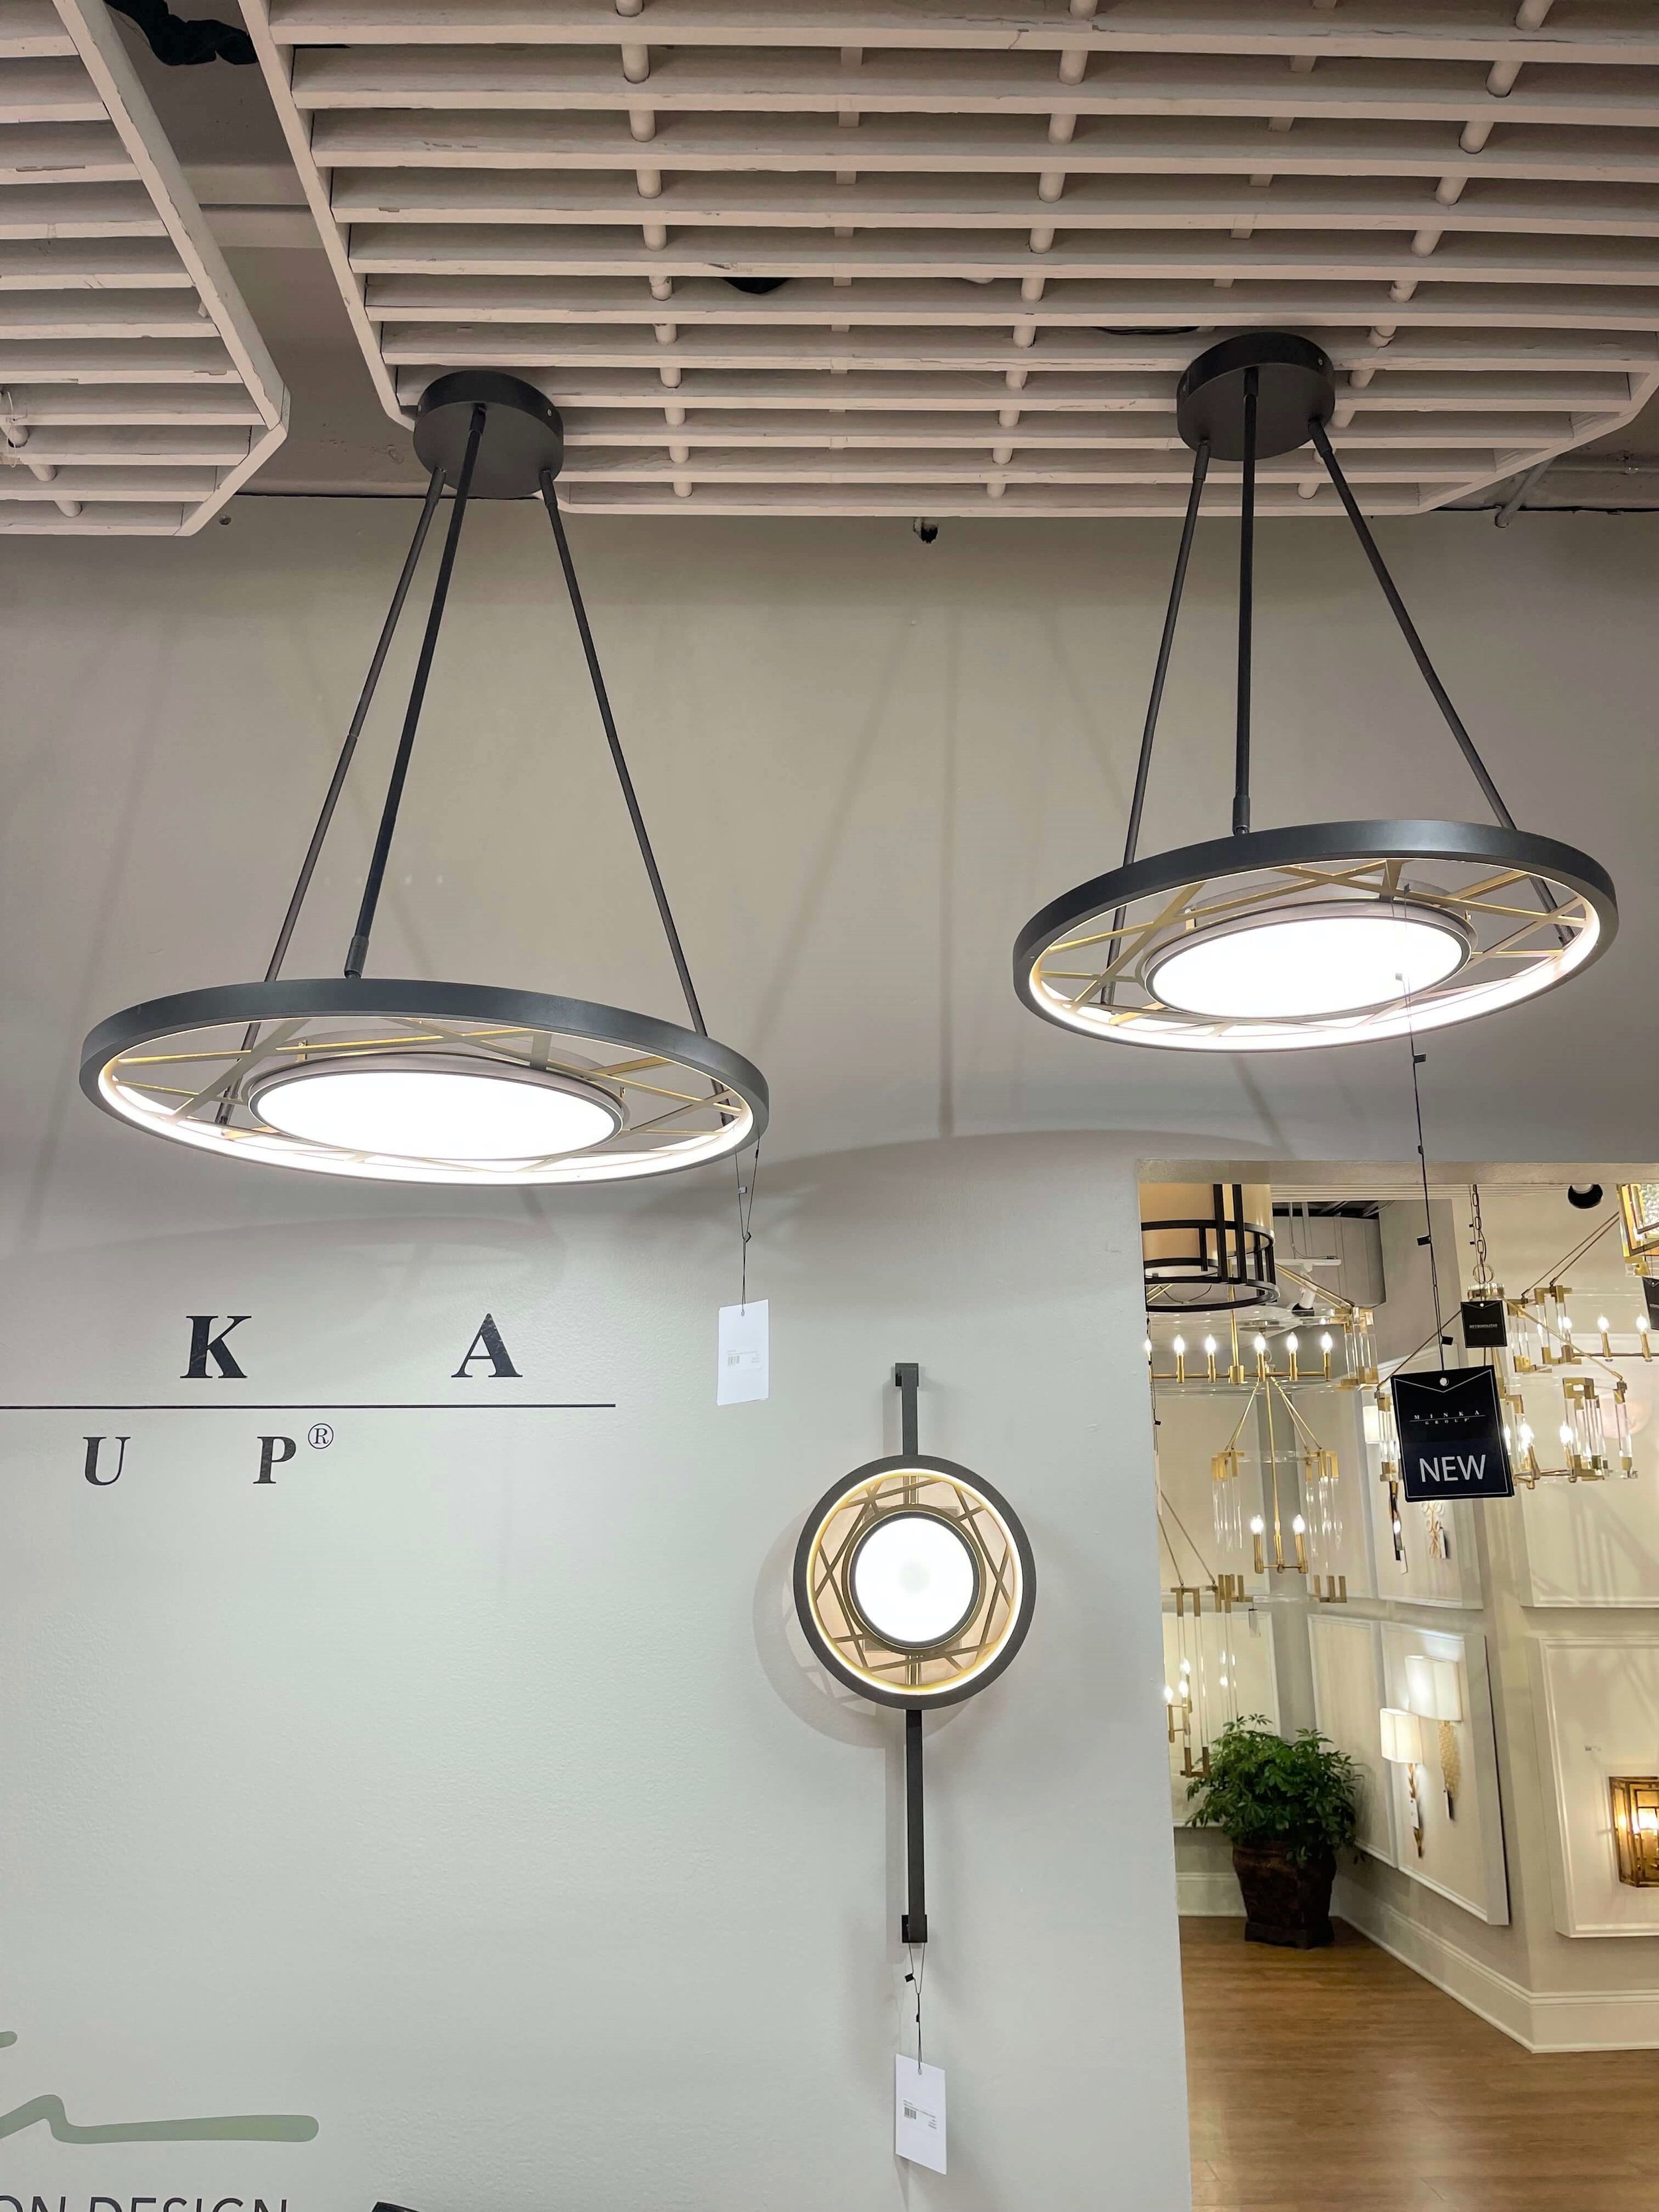 How We've Updated our Light Designs